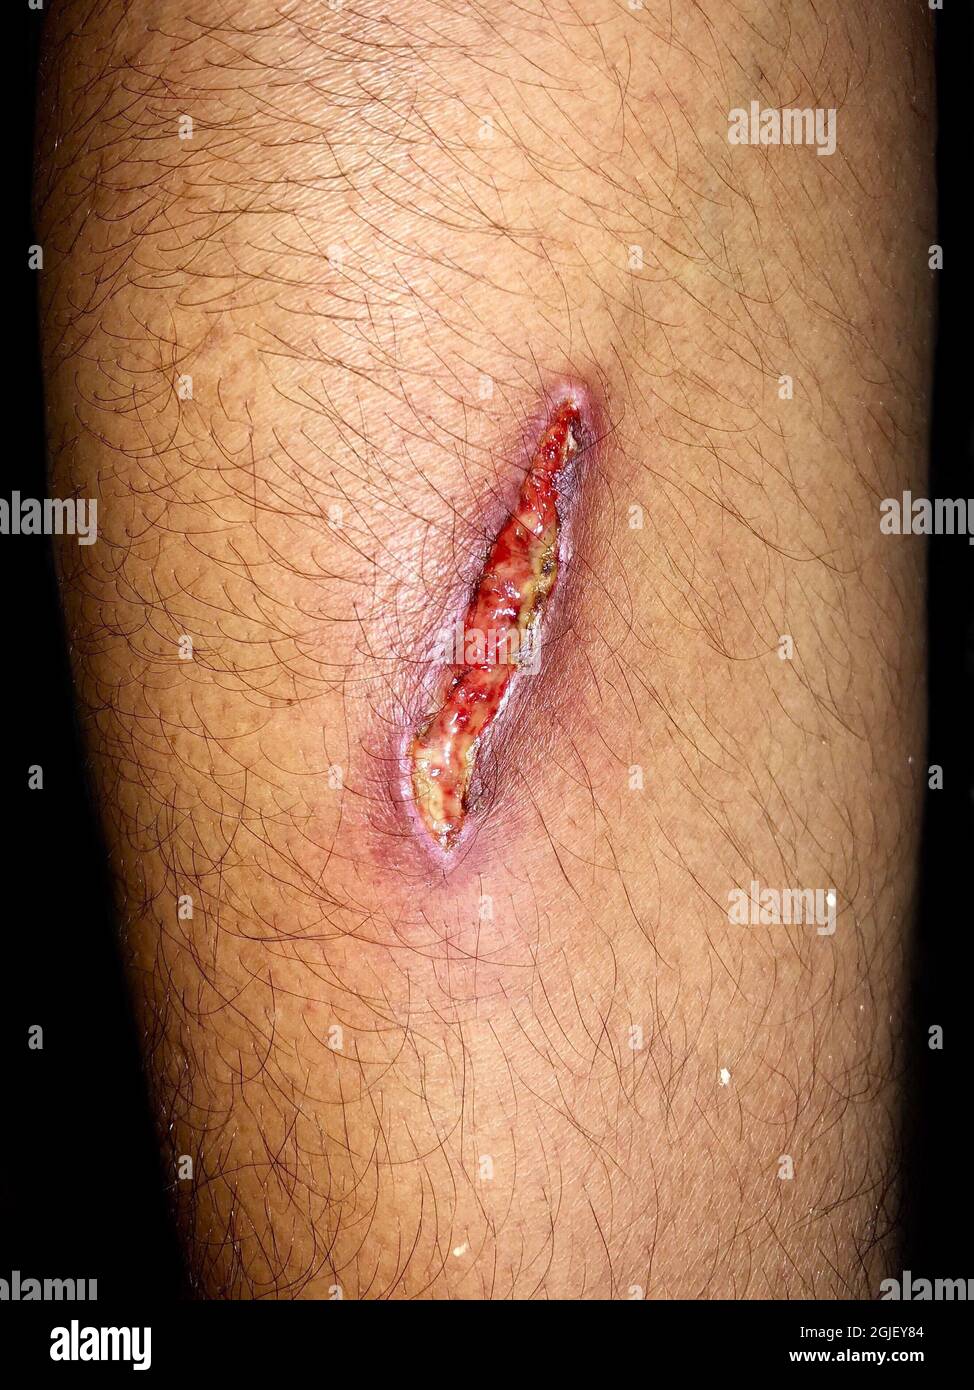 Poor wound healing or secondary wound healing with large wound gapping. Wound infection. Isolated on black. Stock Photo